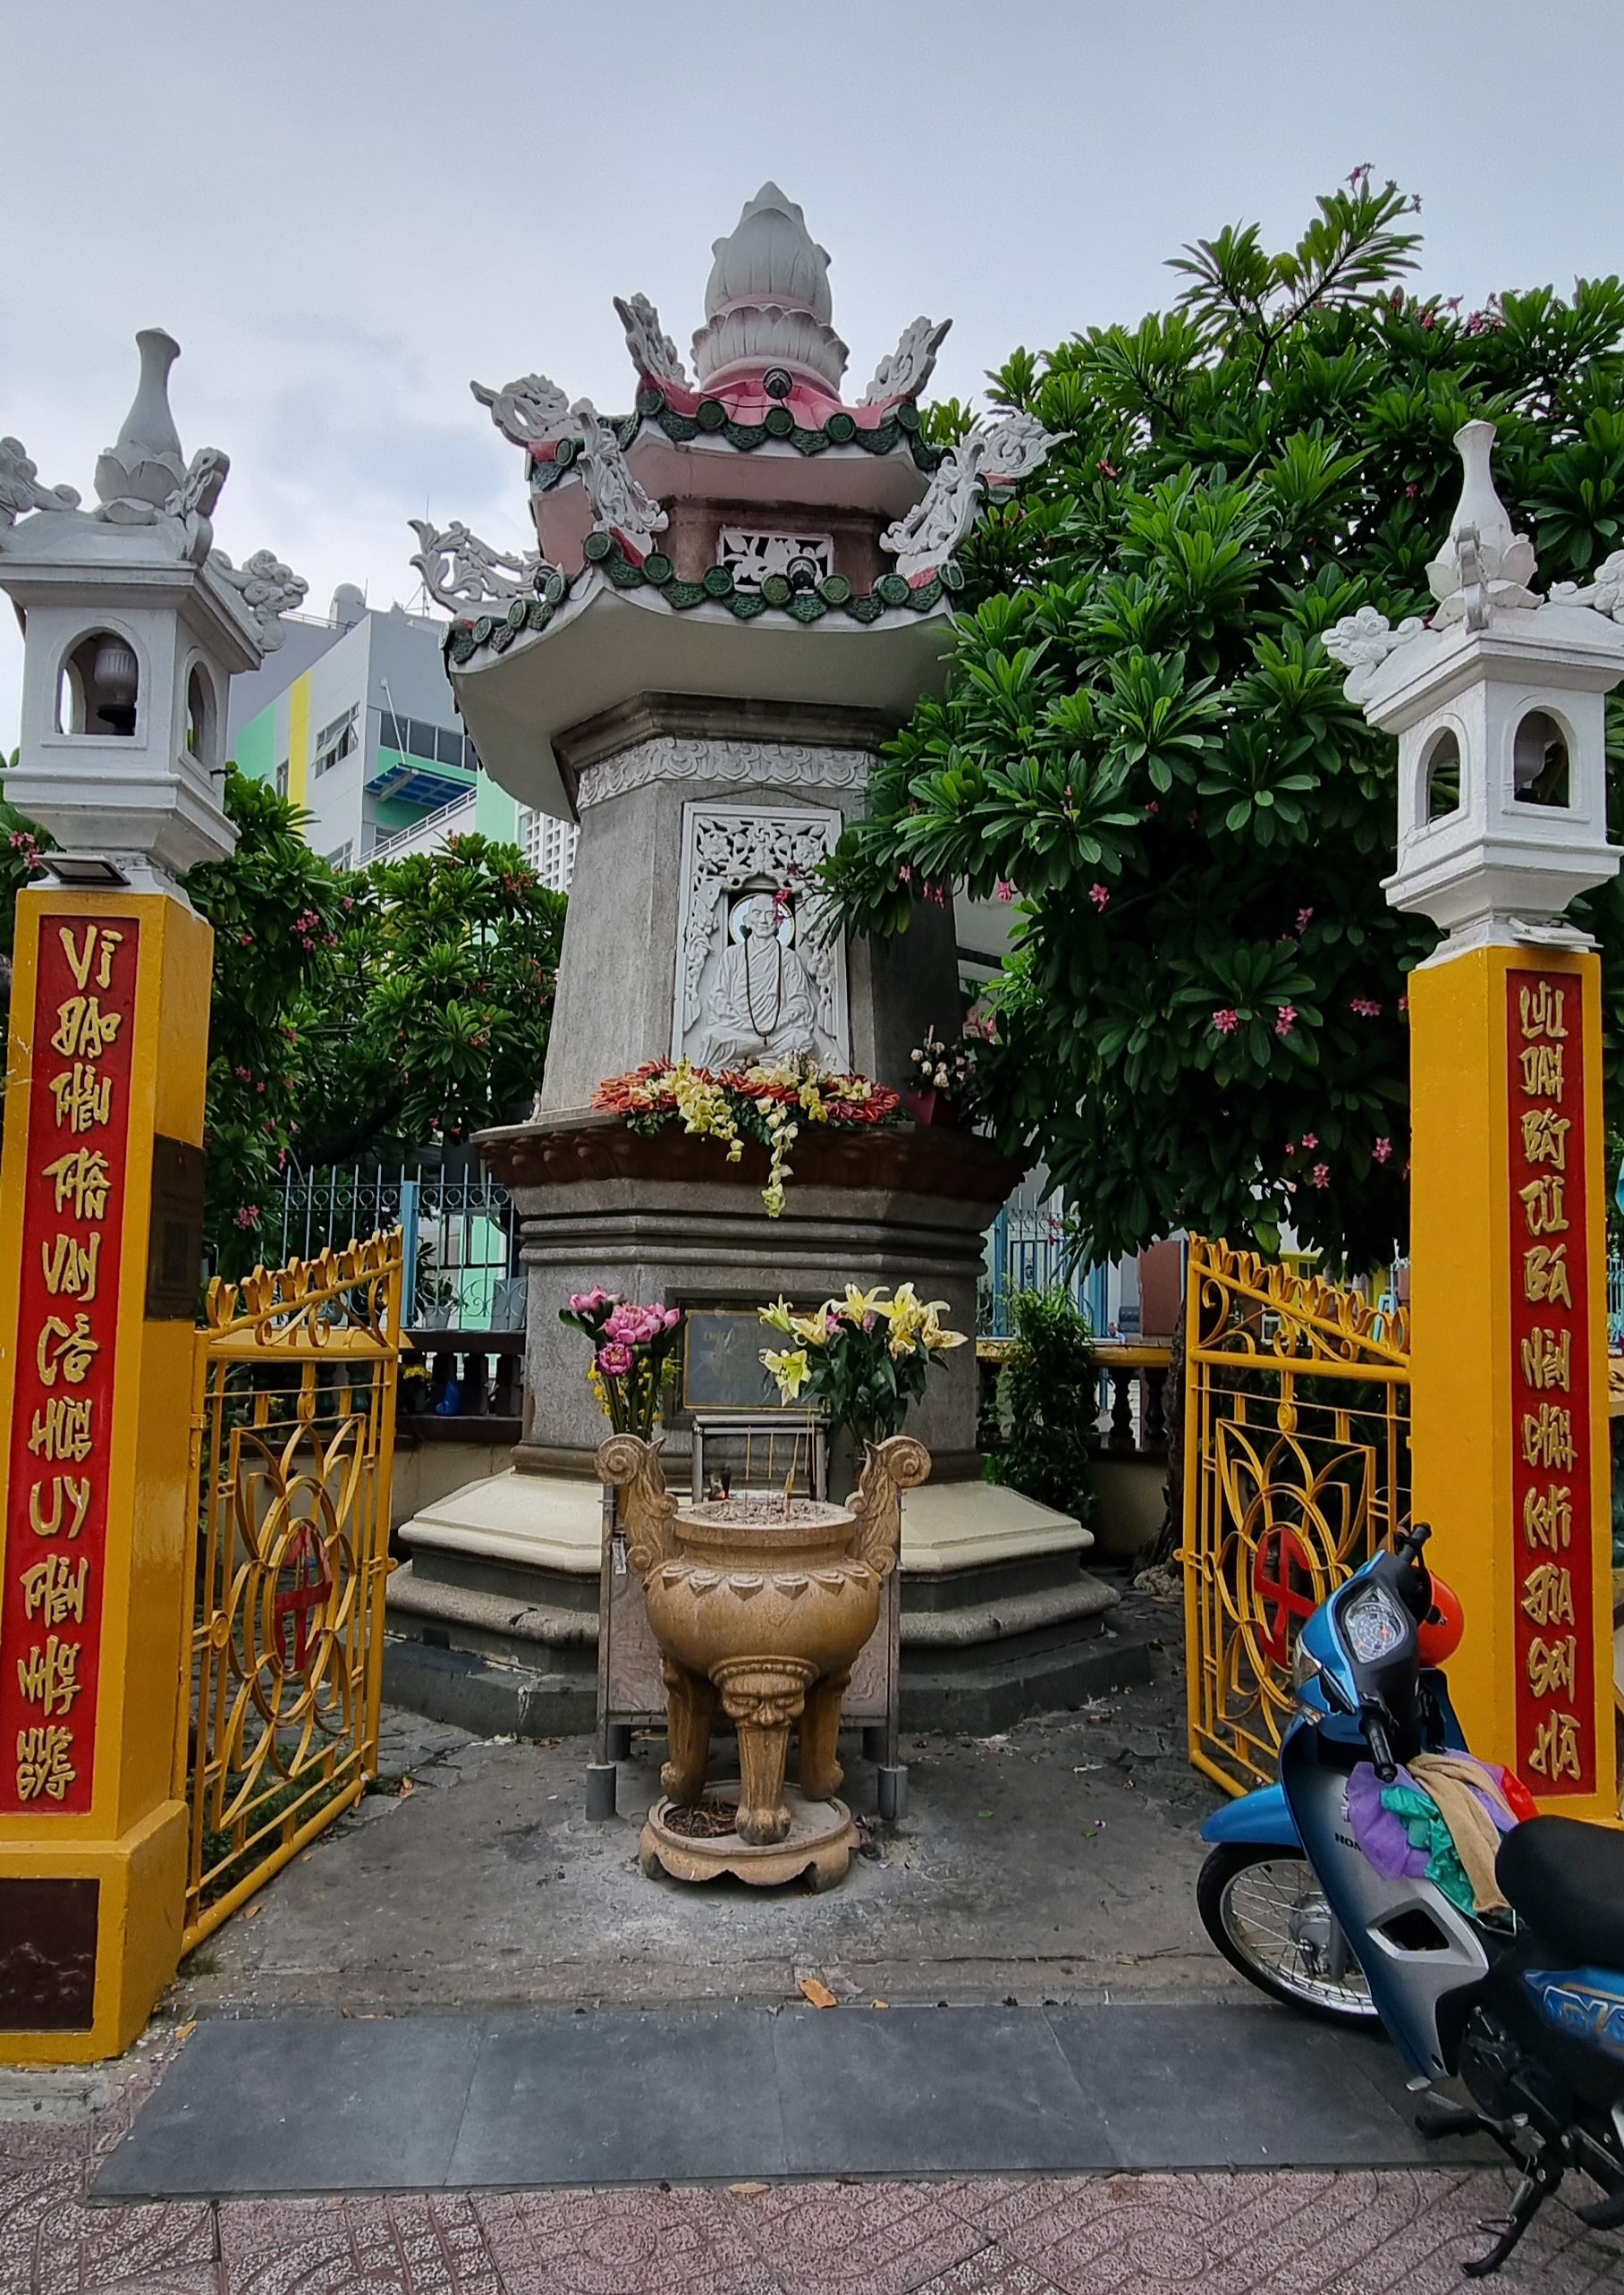 A temple in honor of Thích Quảng Đức at the intersection where he self-immolated himself.